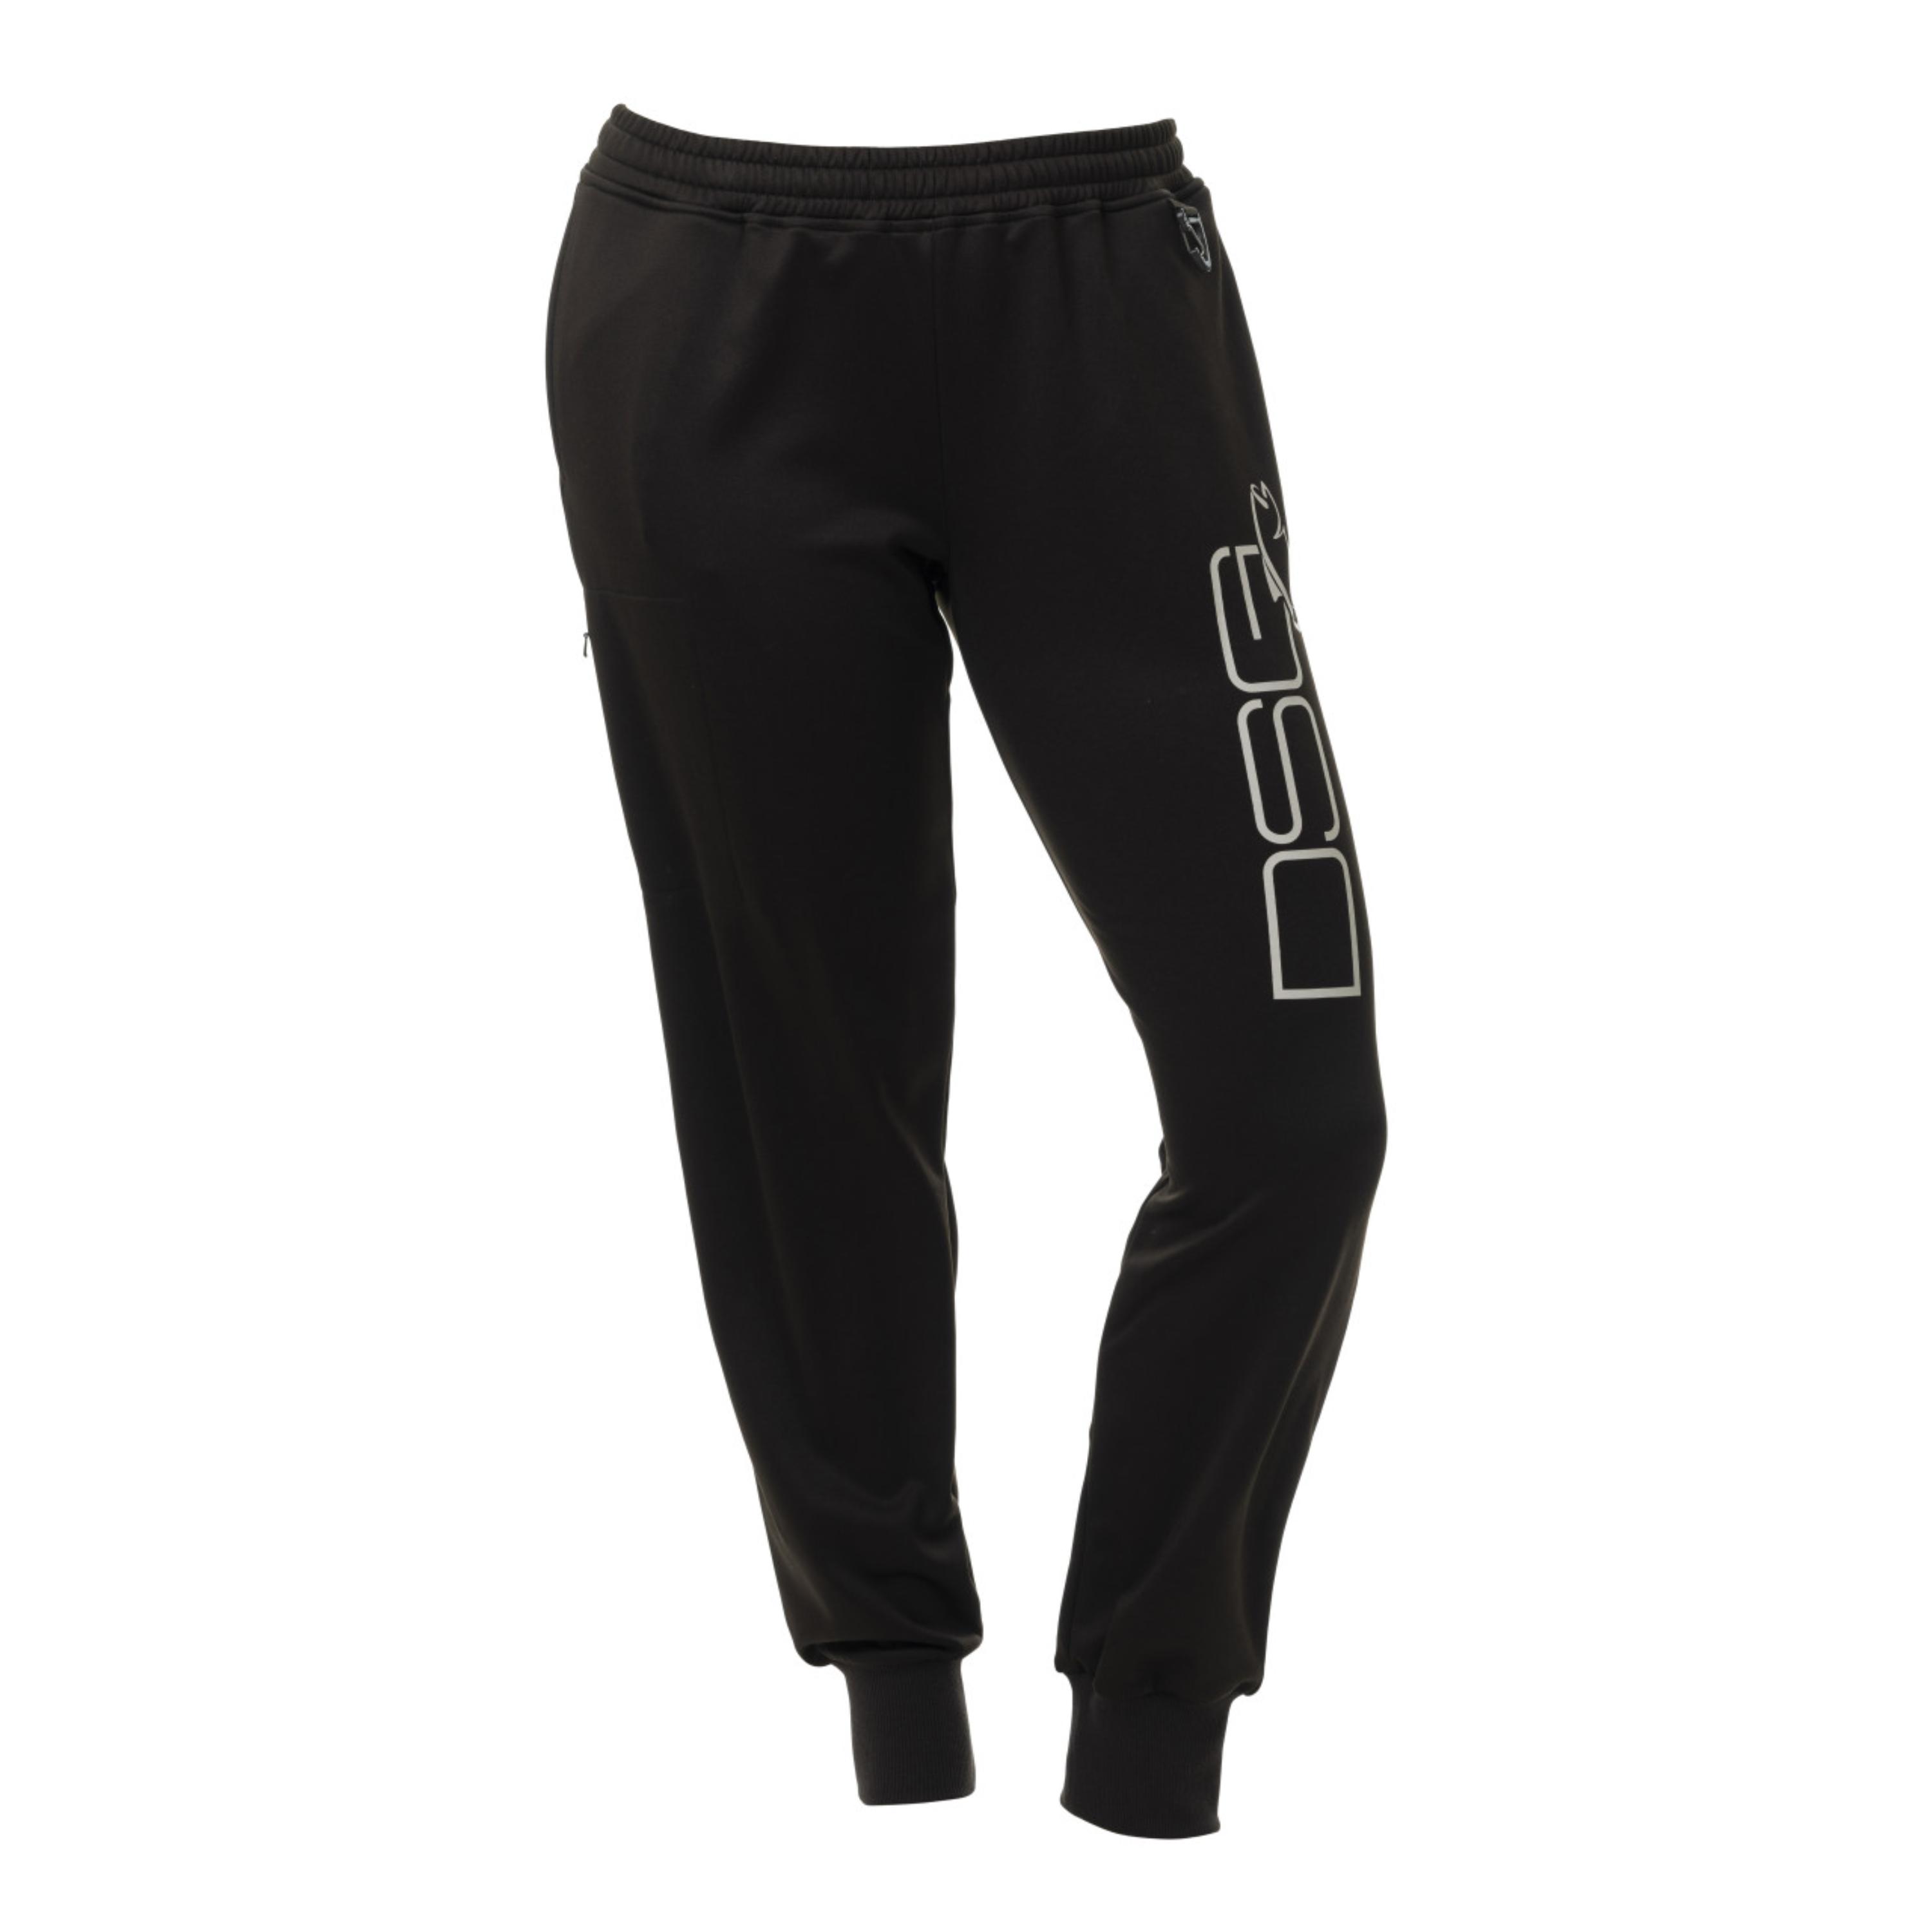 Fishing Sweatpants with DSG Outerwear Logo - 4 Colors